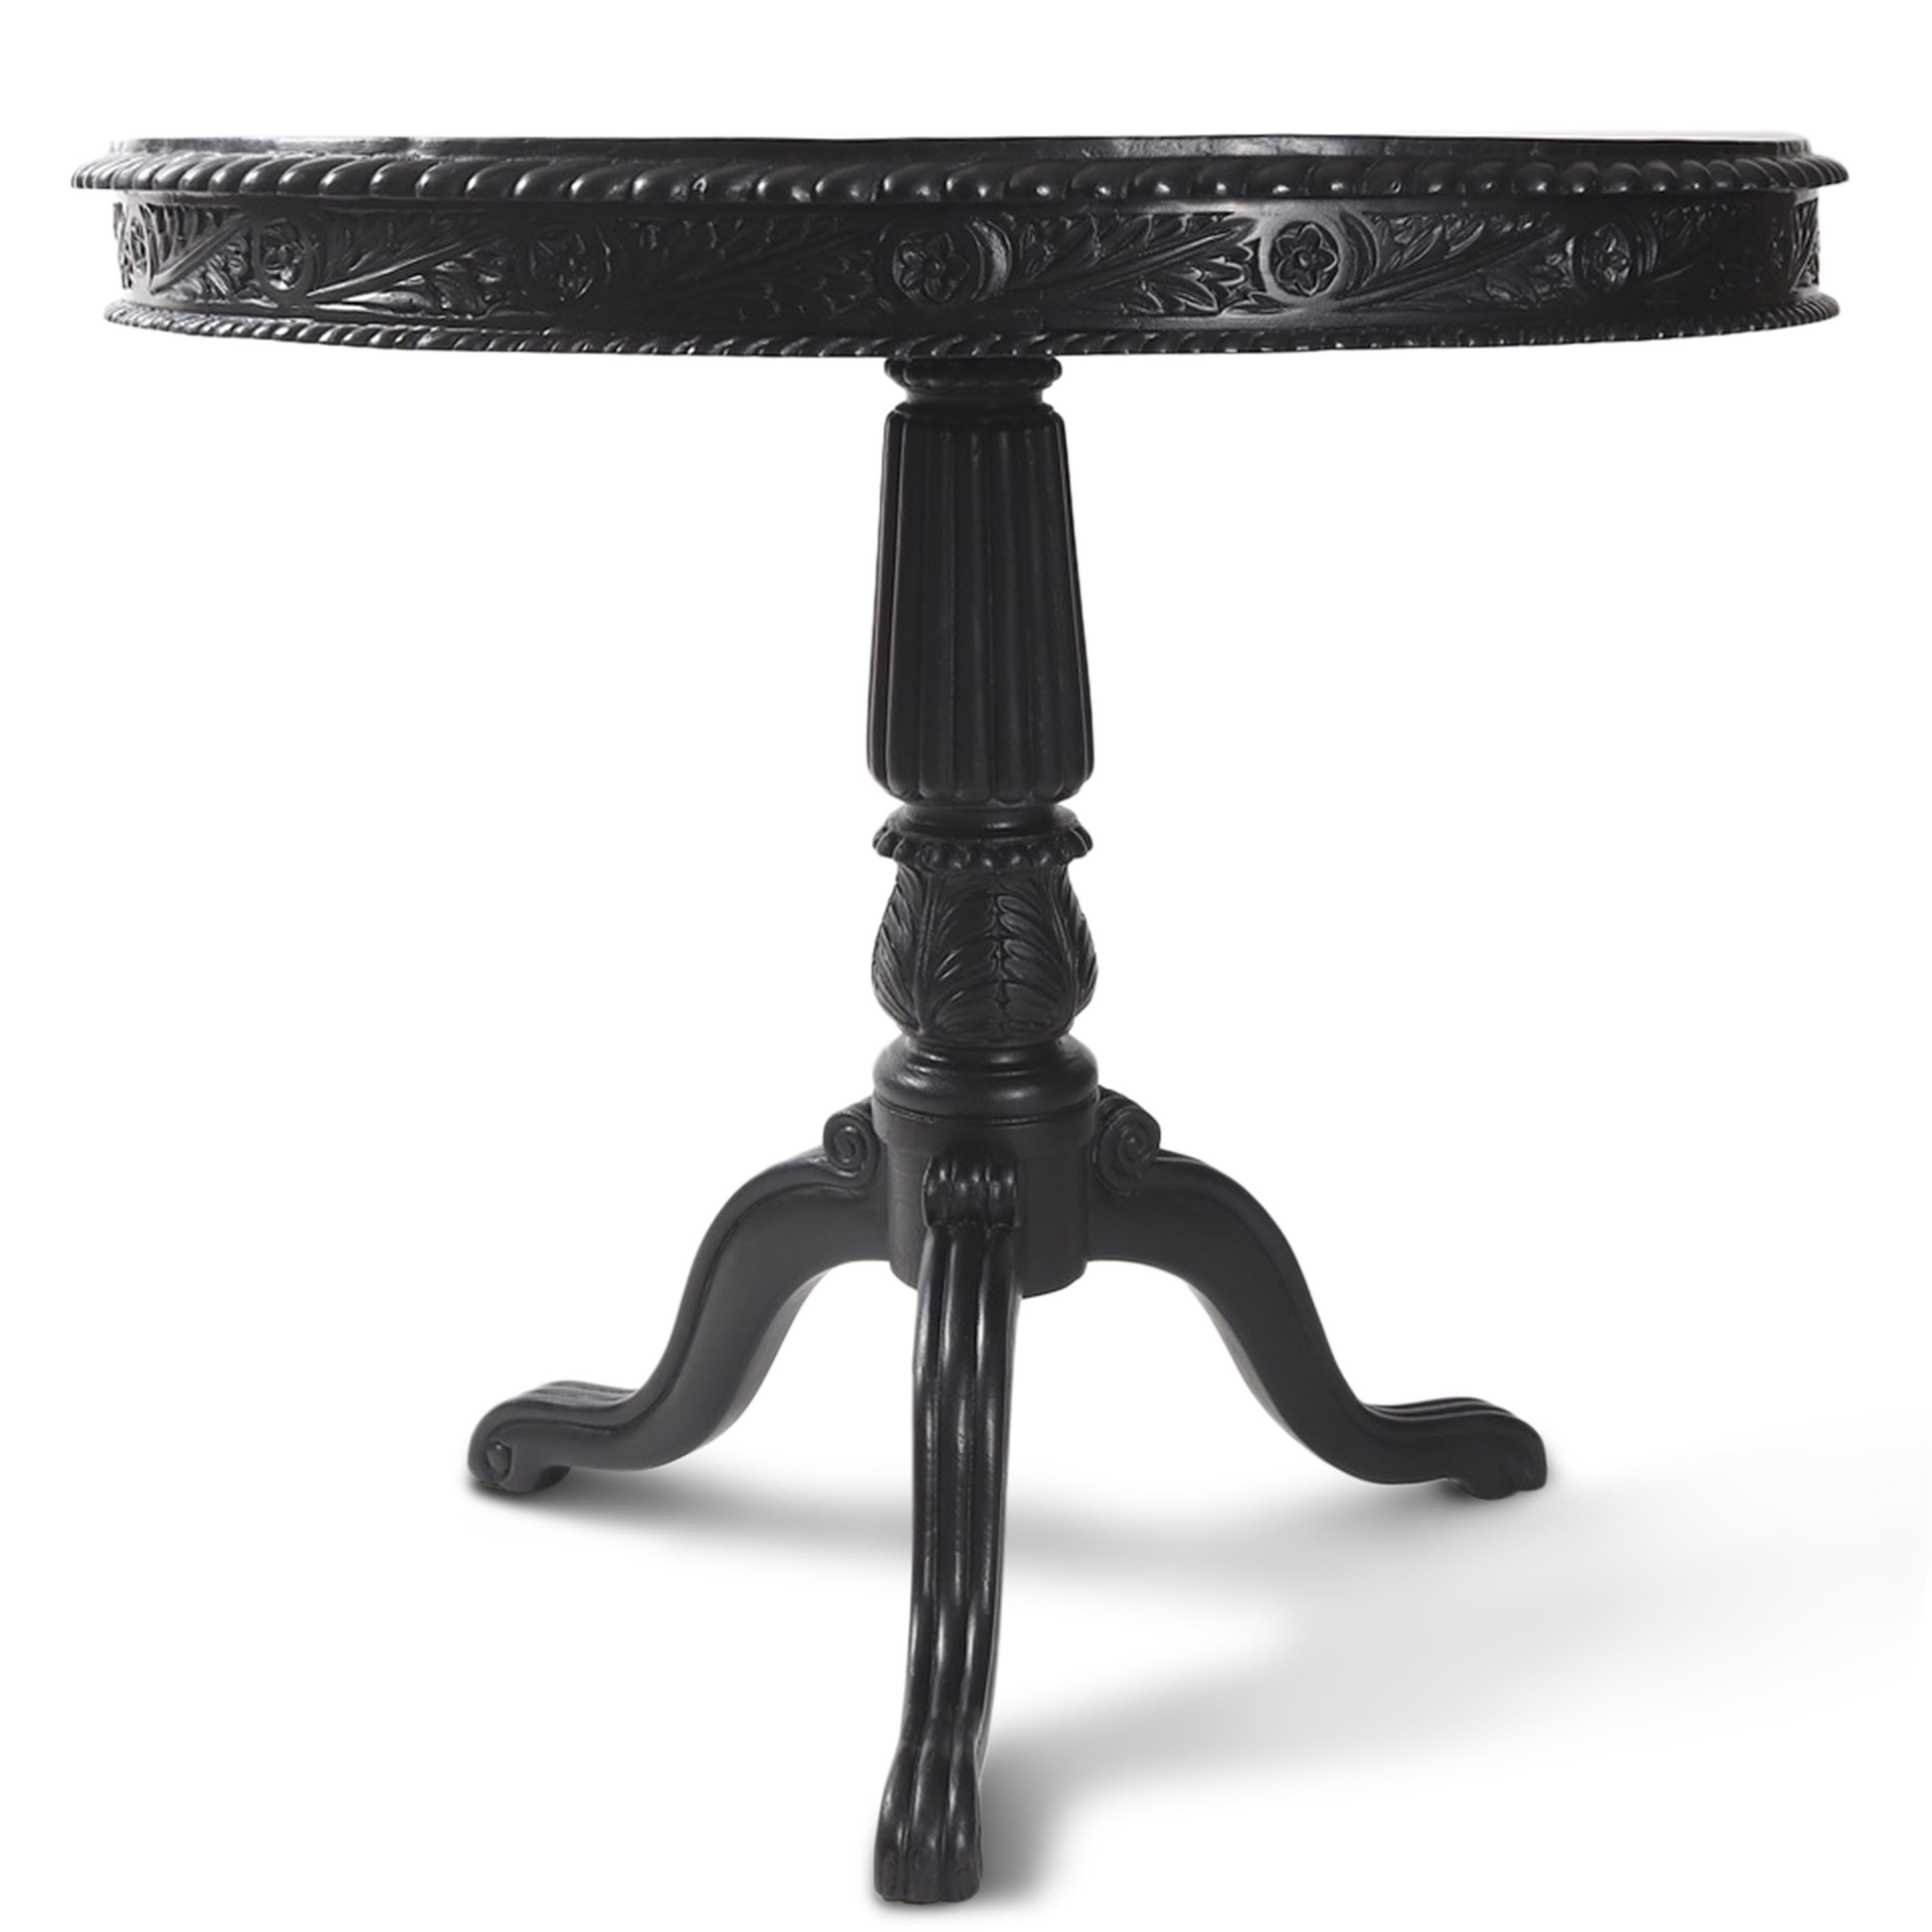 A 19th century Ceylonese specimen tilt-top center table with an ebonized finish. It features an exotic wood inlay in a mesmerizing radiating pattern on its face and beautifully carved details on the top apron and paw feet.